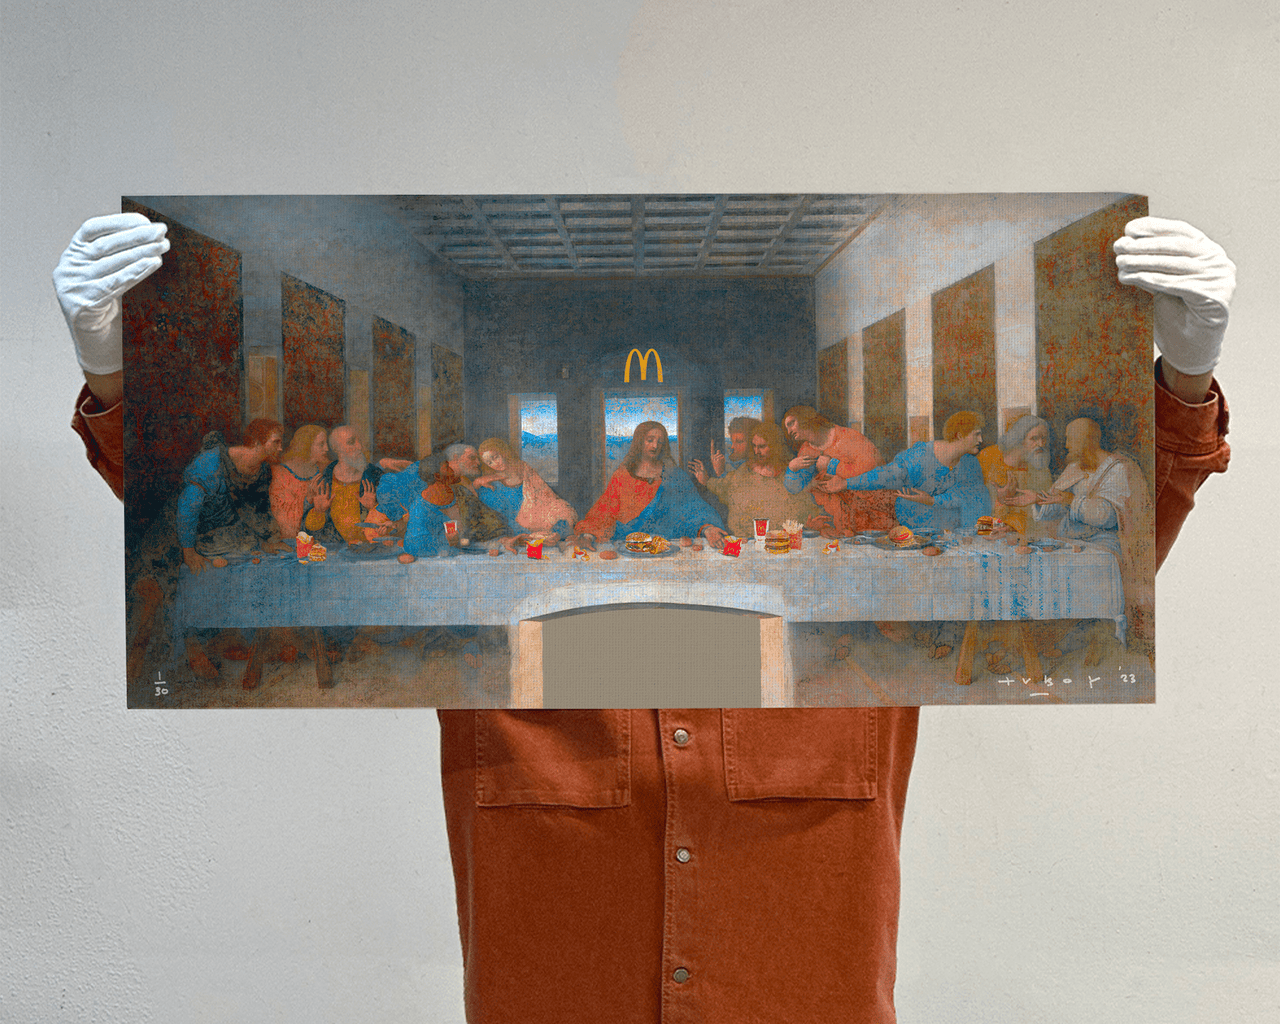 THE FAST SUPPER